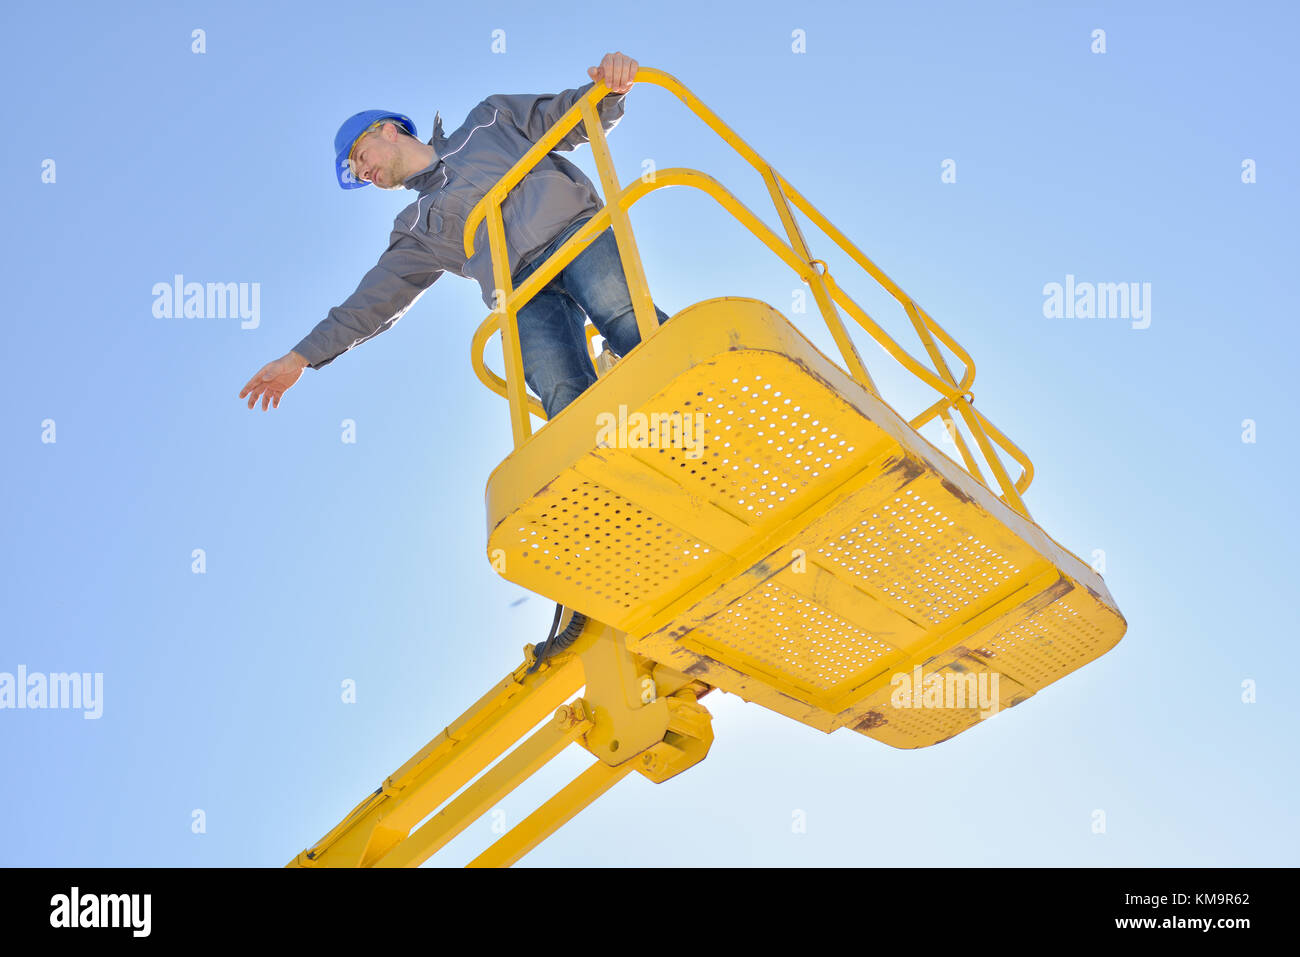 worker man giving directions from a yellow crane Stock Photo